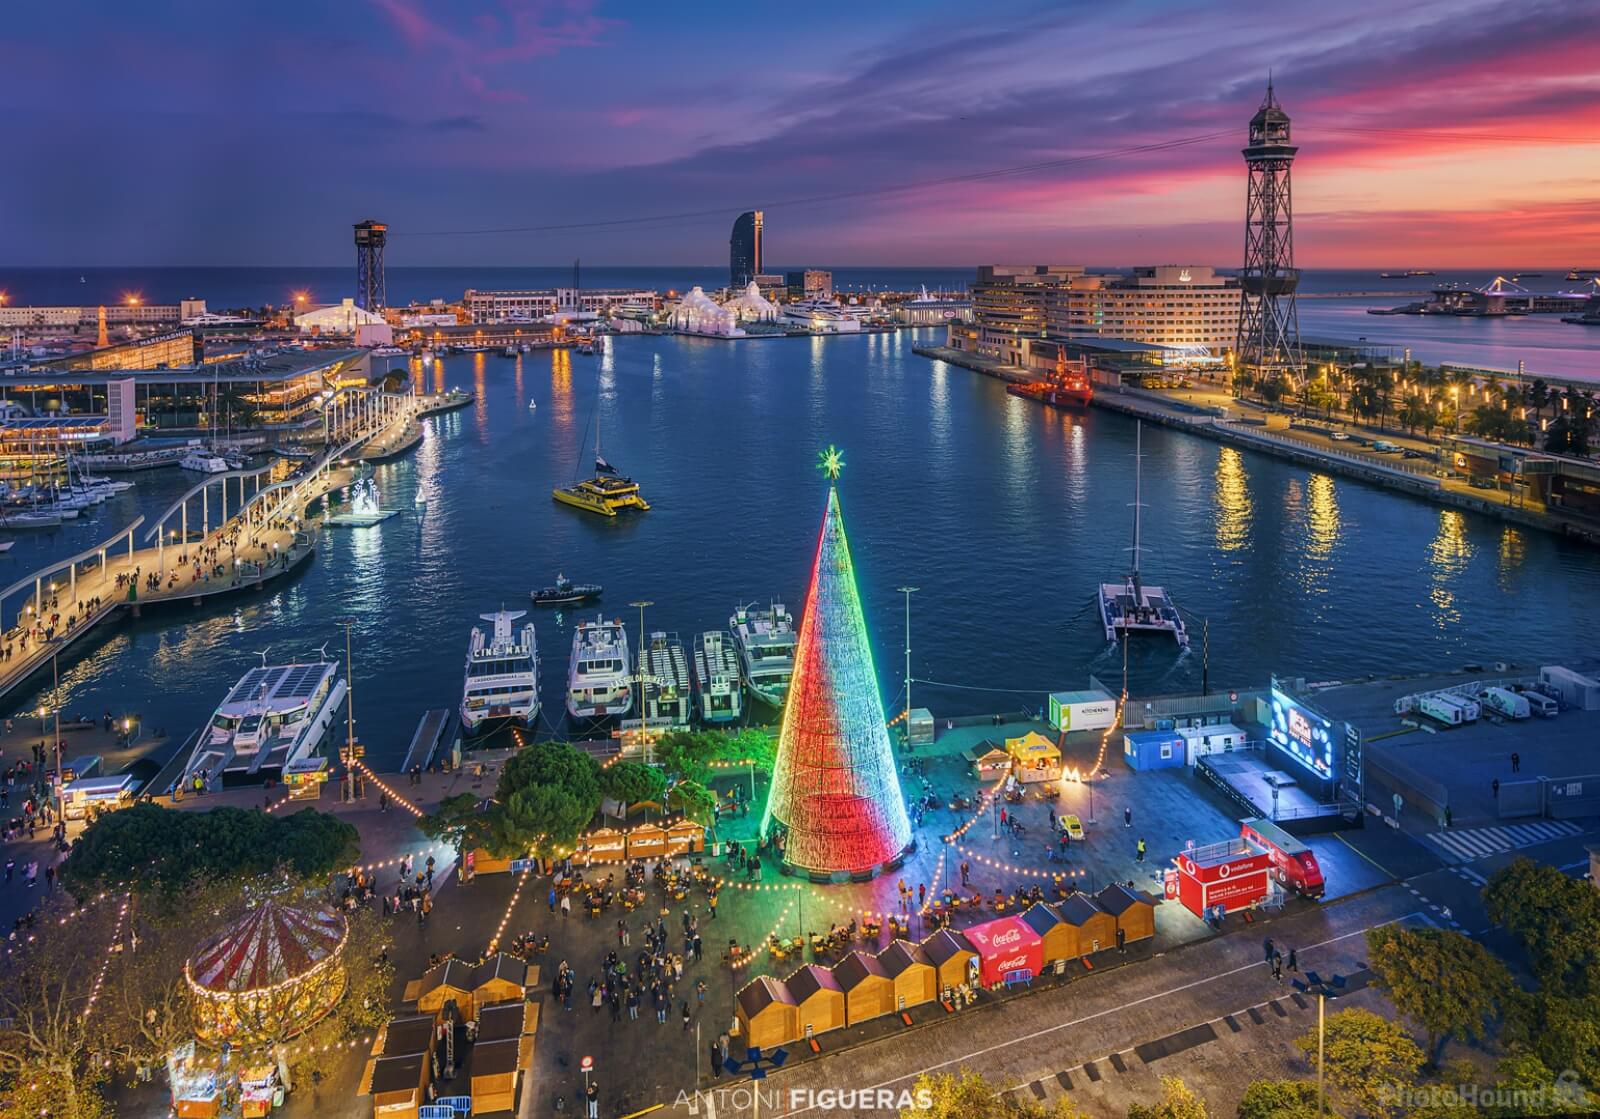 Image of Barcelona Harbour from Colon Monument by Antonio Figueras Barranco